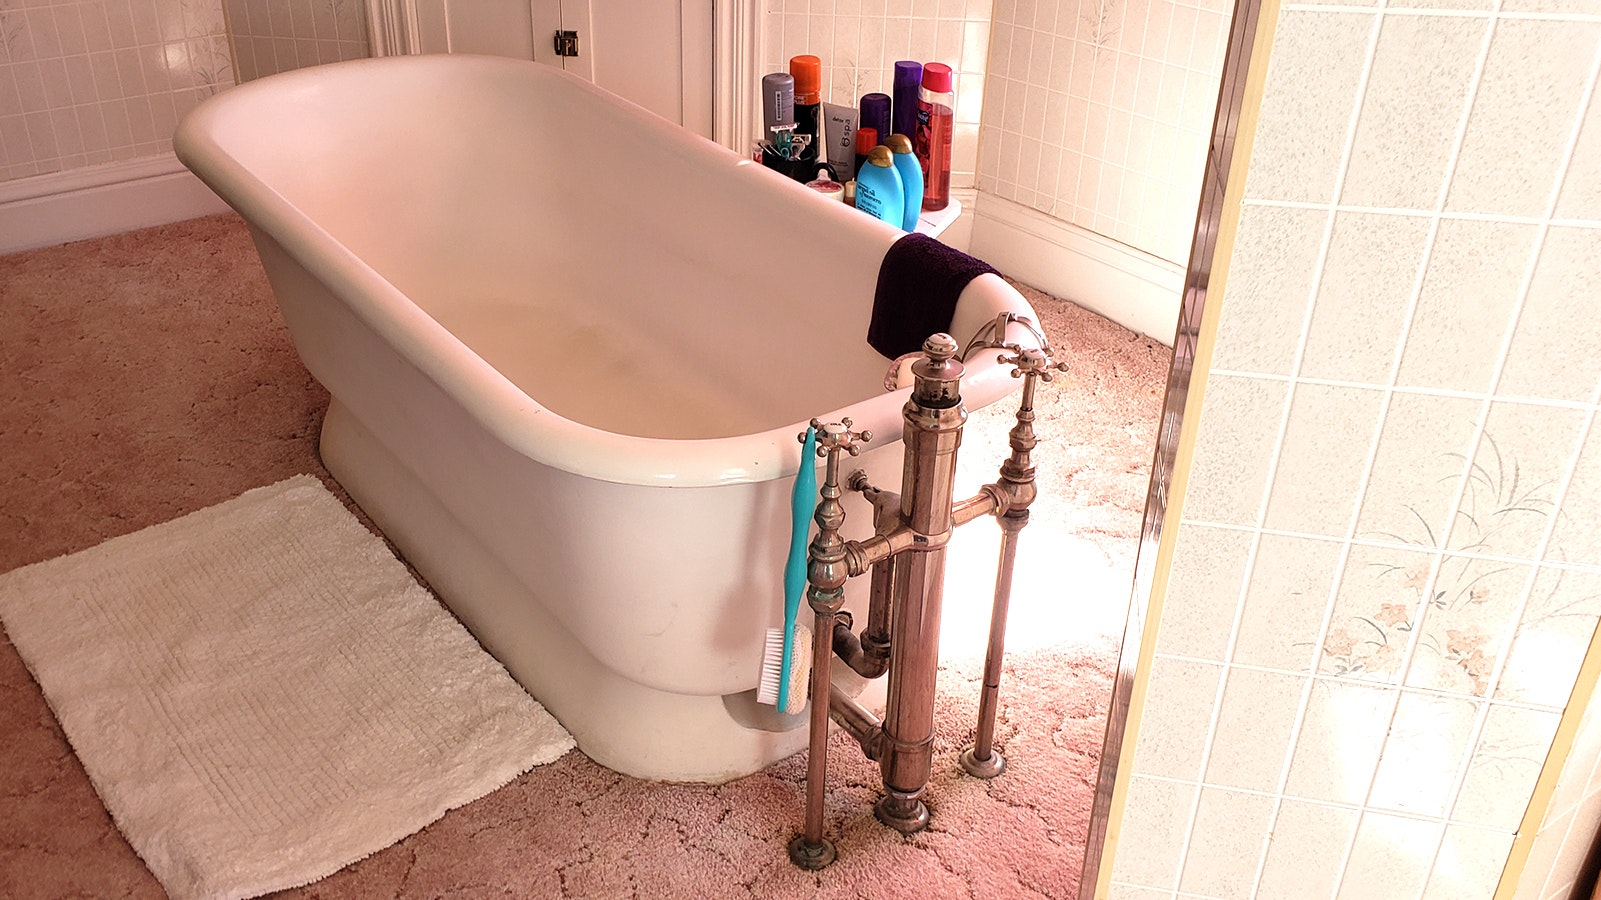 The tub is the type that fills from the bottom rather than the top.